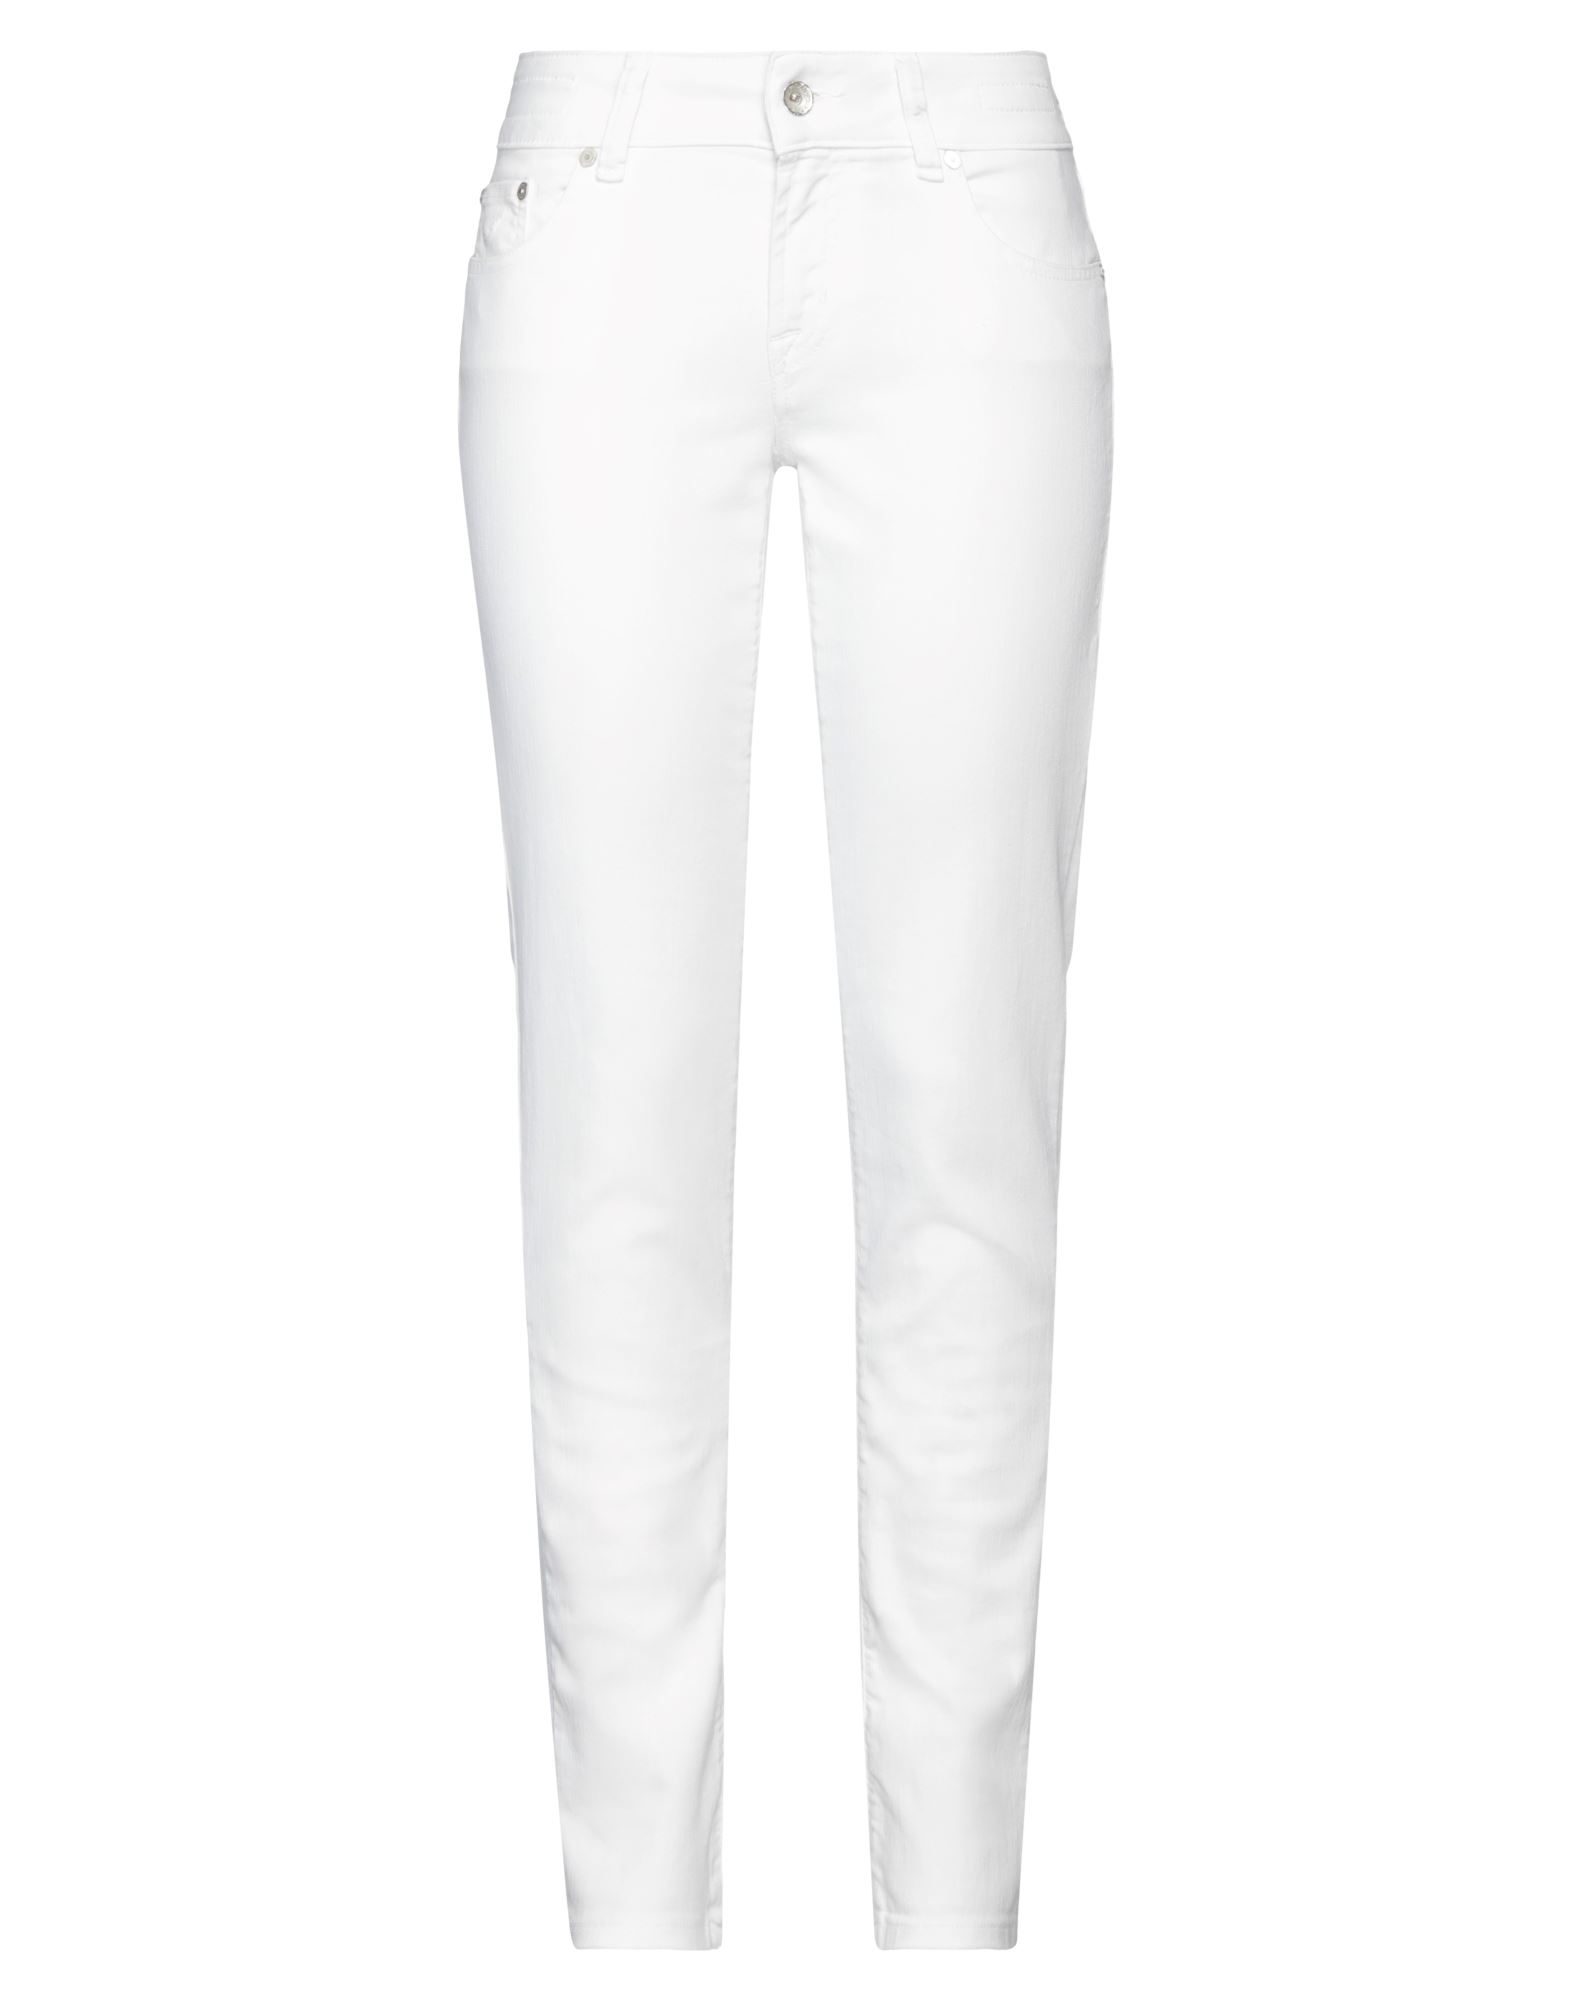 Jacob Cohёn Woman Jeans Ivory Size 30 Cotton, Polyester, Elastane In White